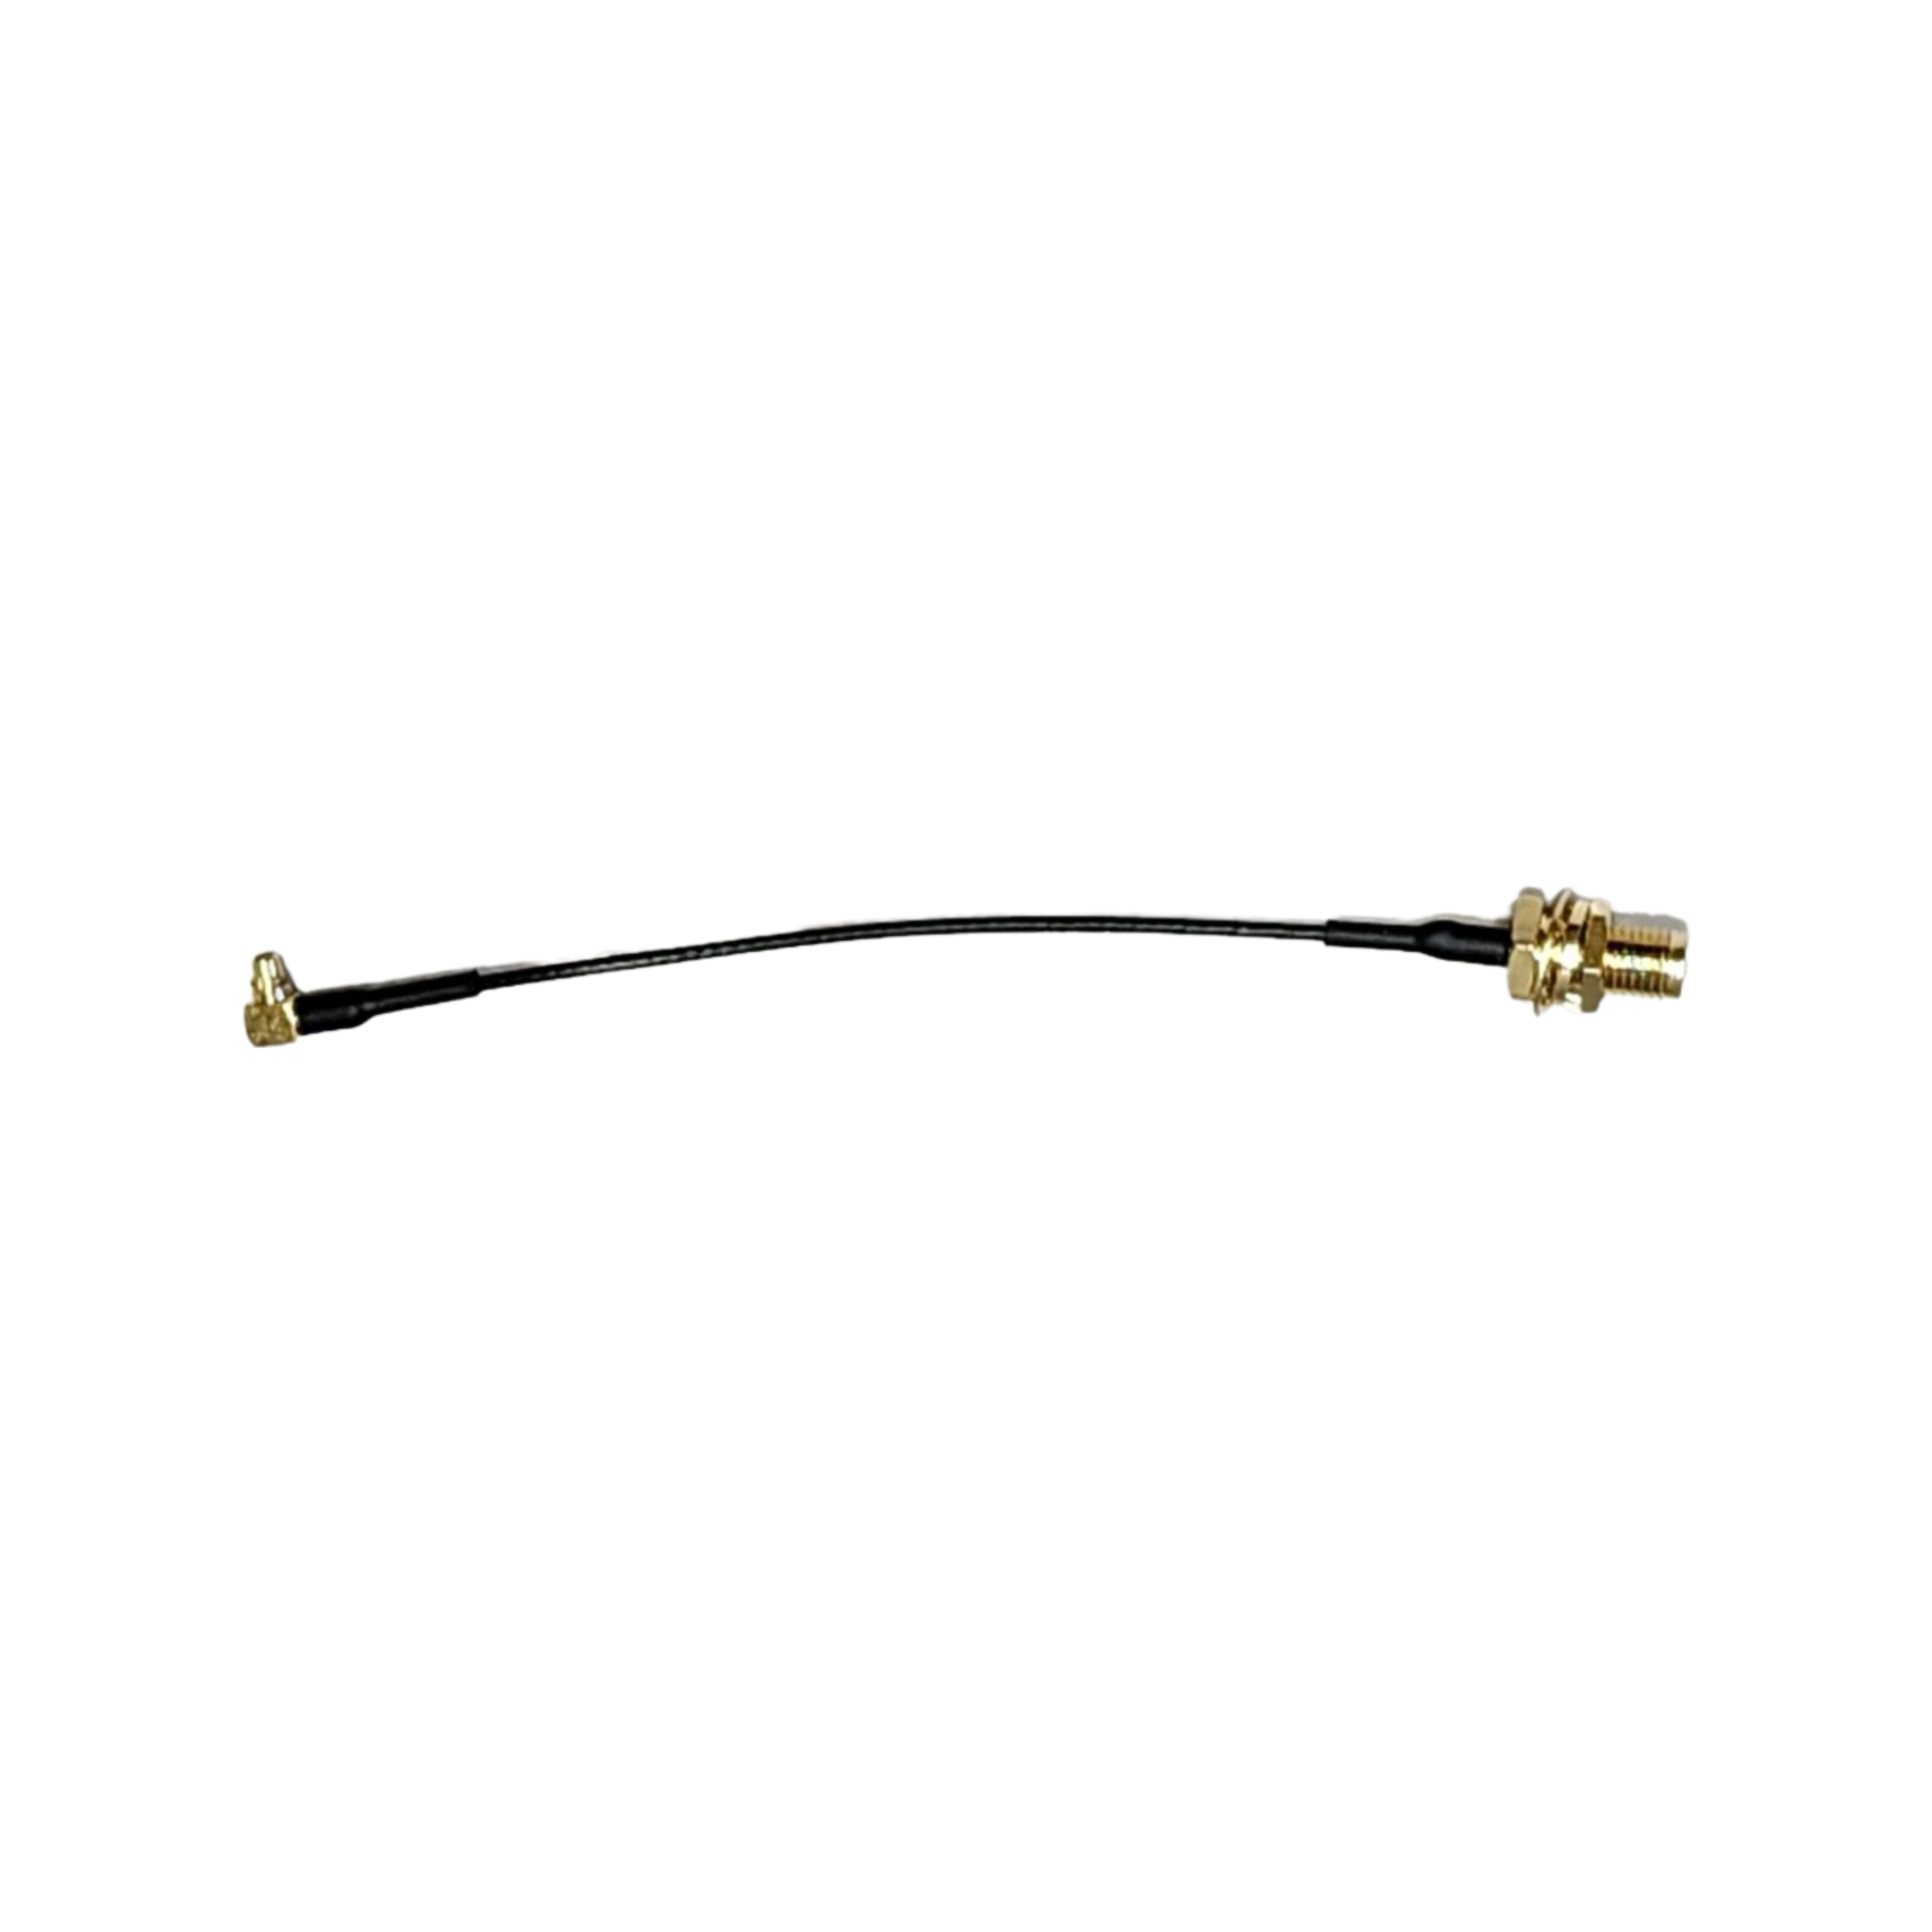 MMCX to SMA COAX Cable